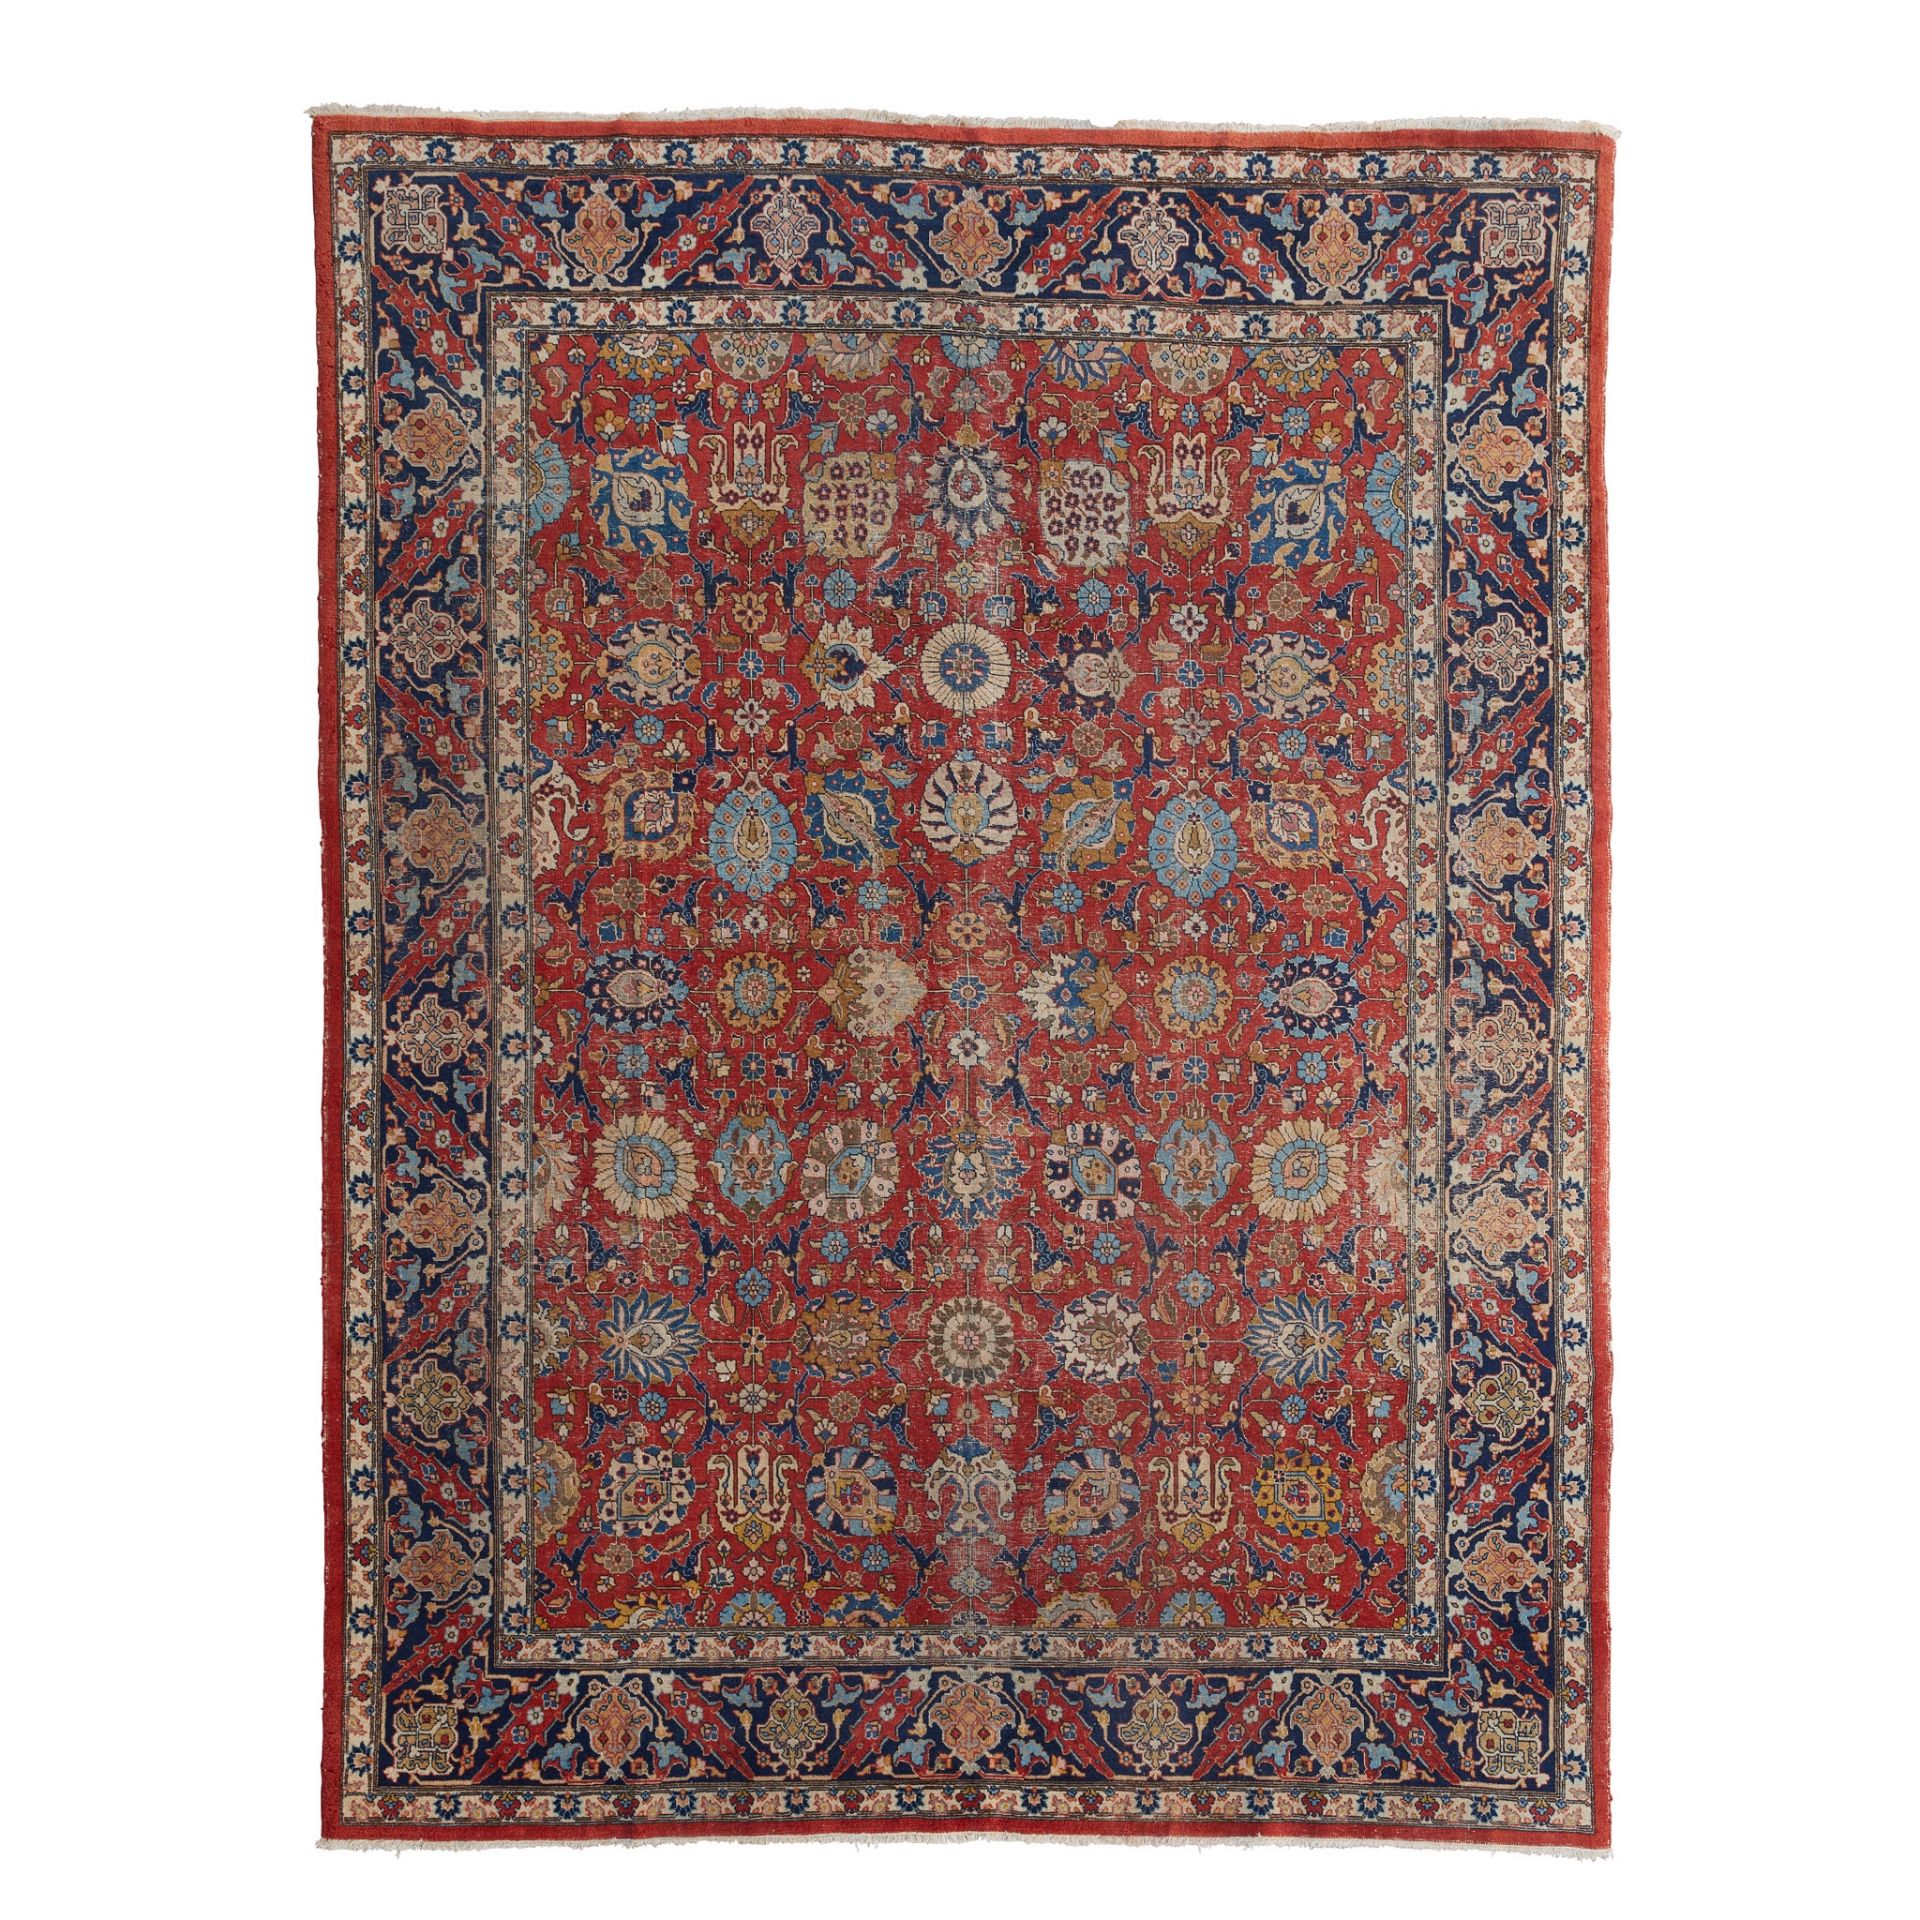 TABRIZ CARPET NORTHWEST PERSIA, LATE 19TH/EARLY 20TH CENTURY